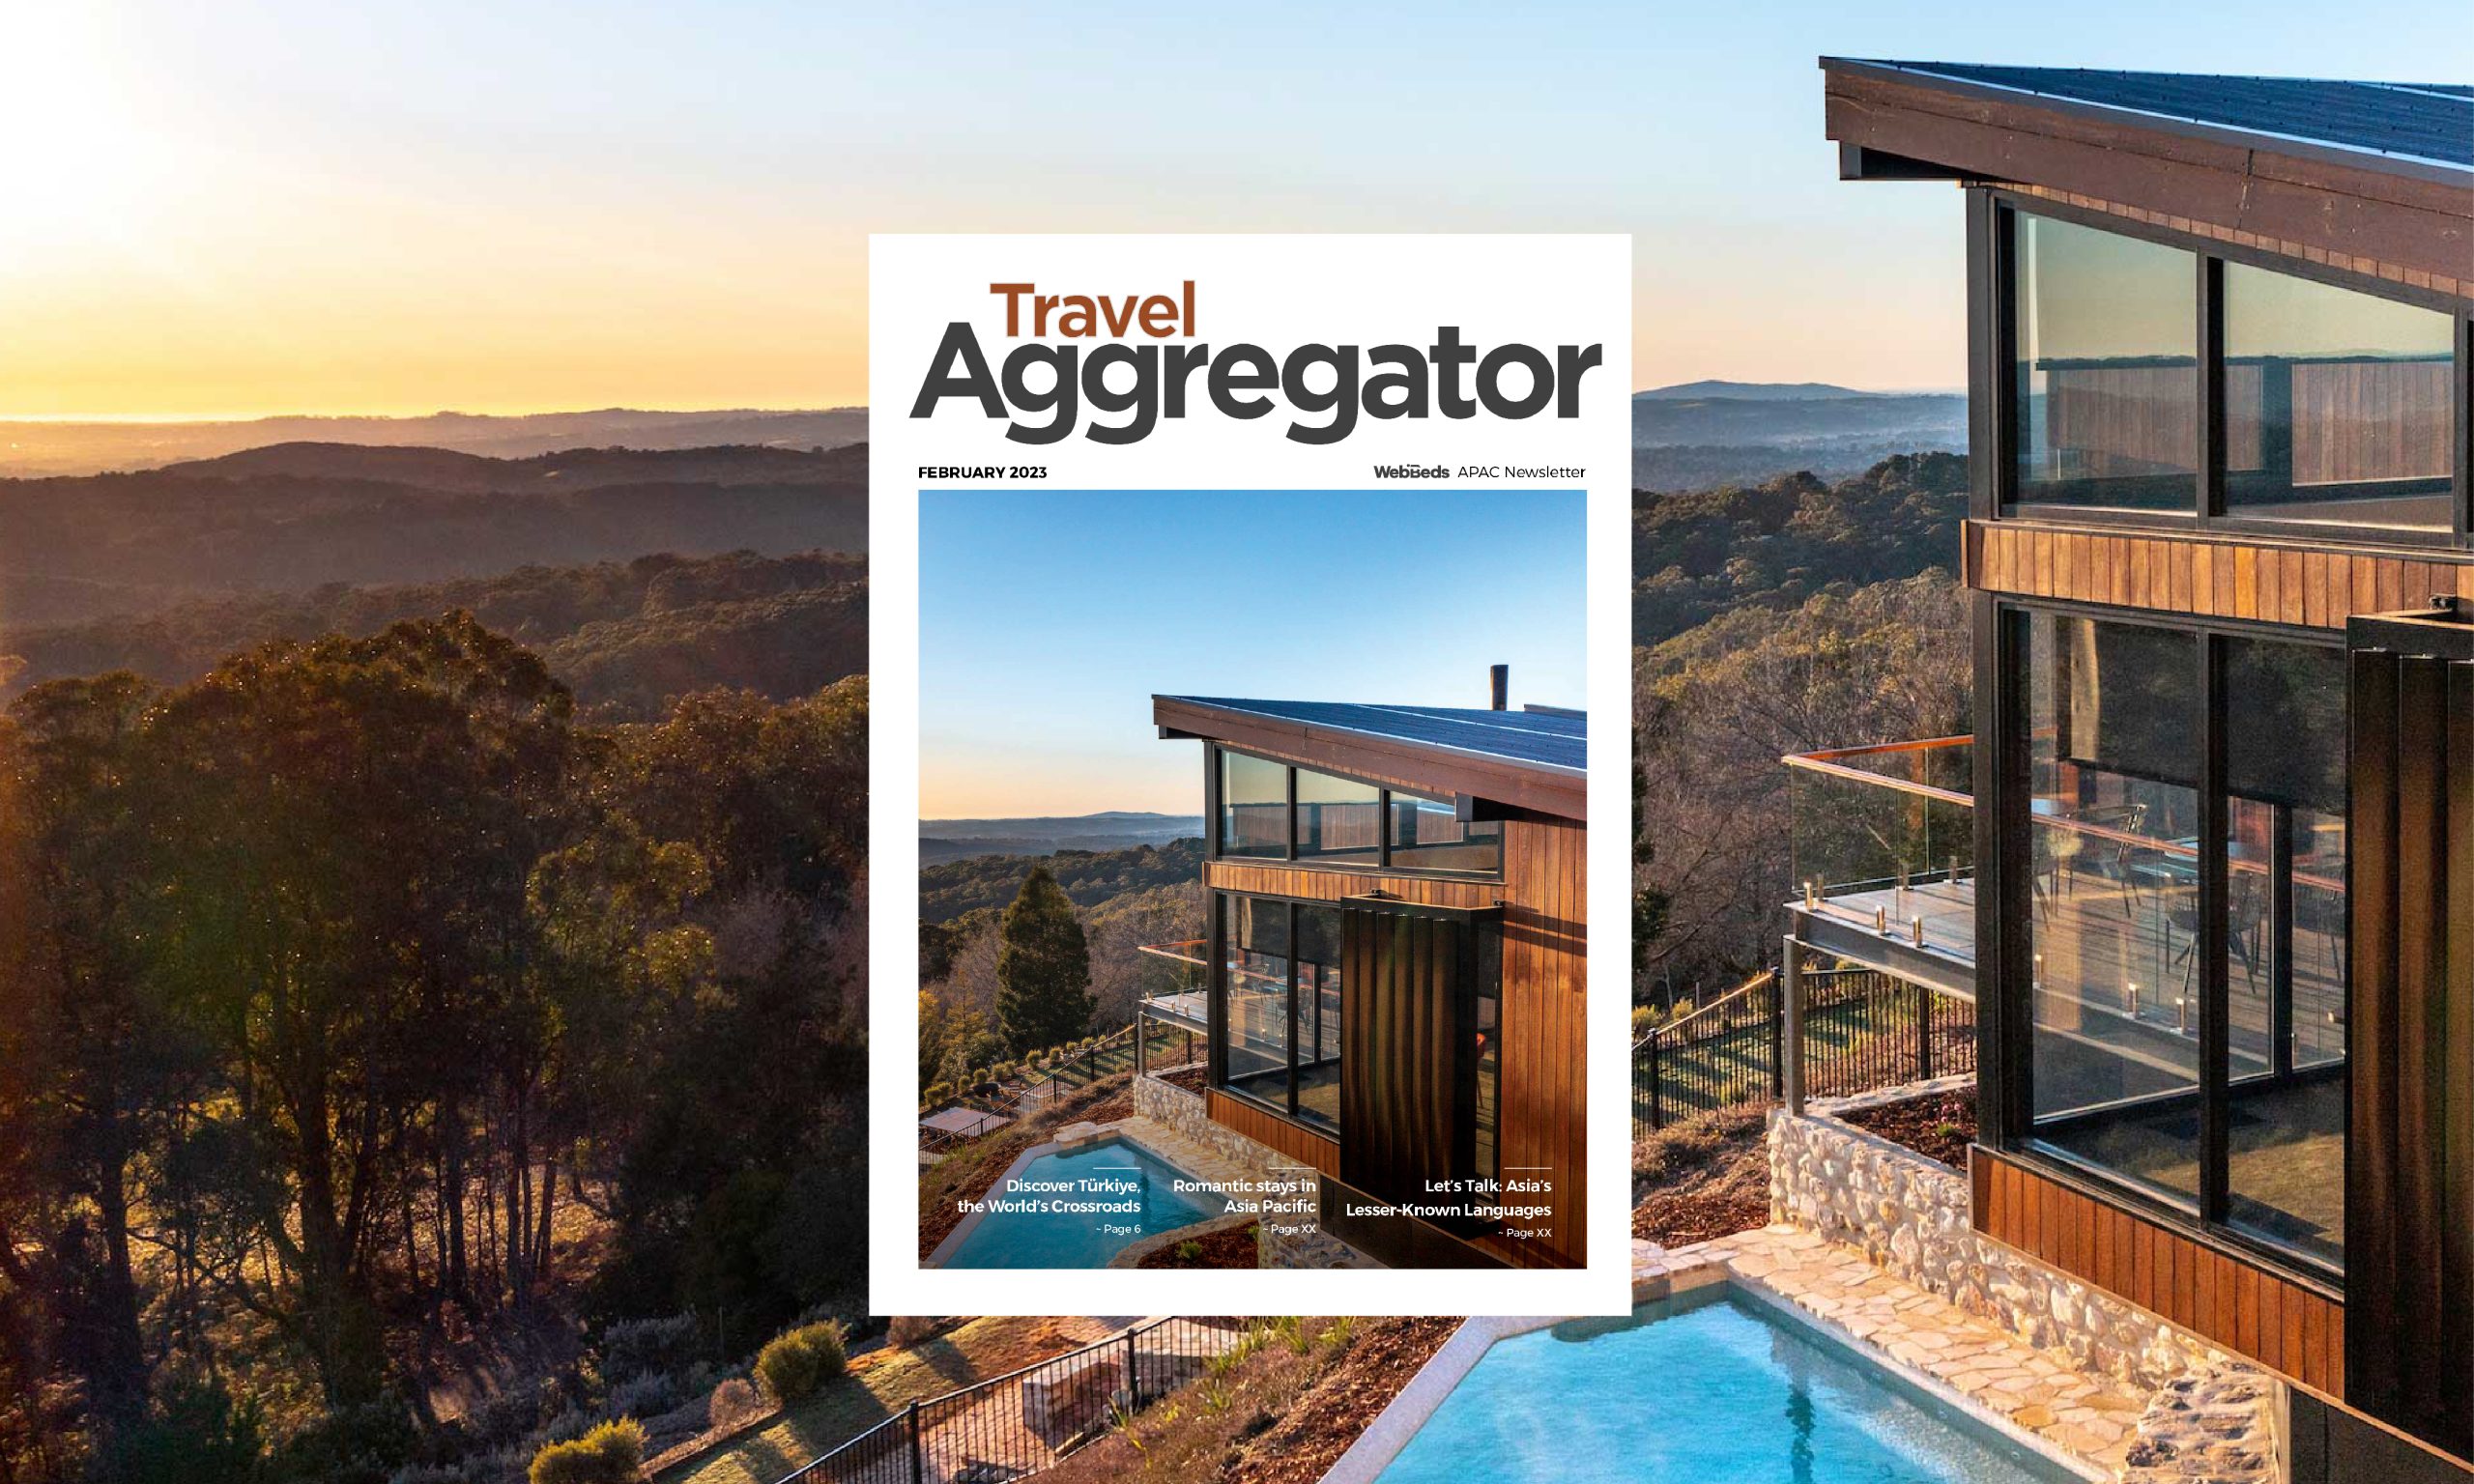 Travel Aggregator Magazine – February 2023 Edition Out Now